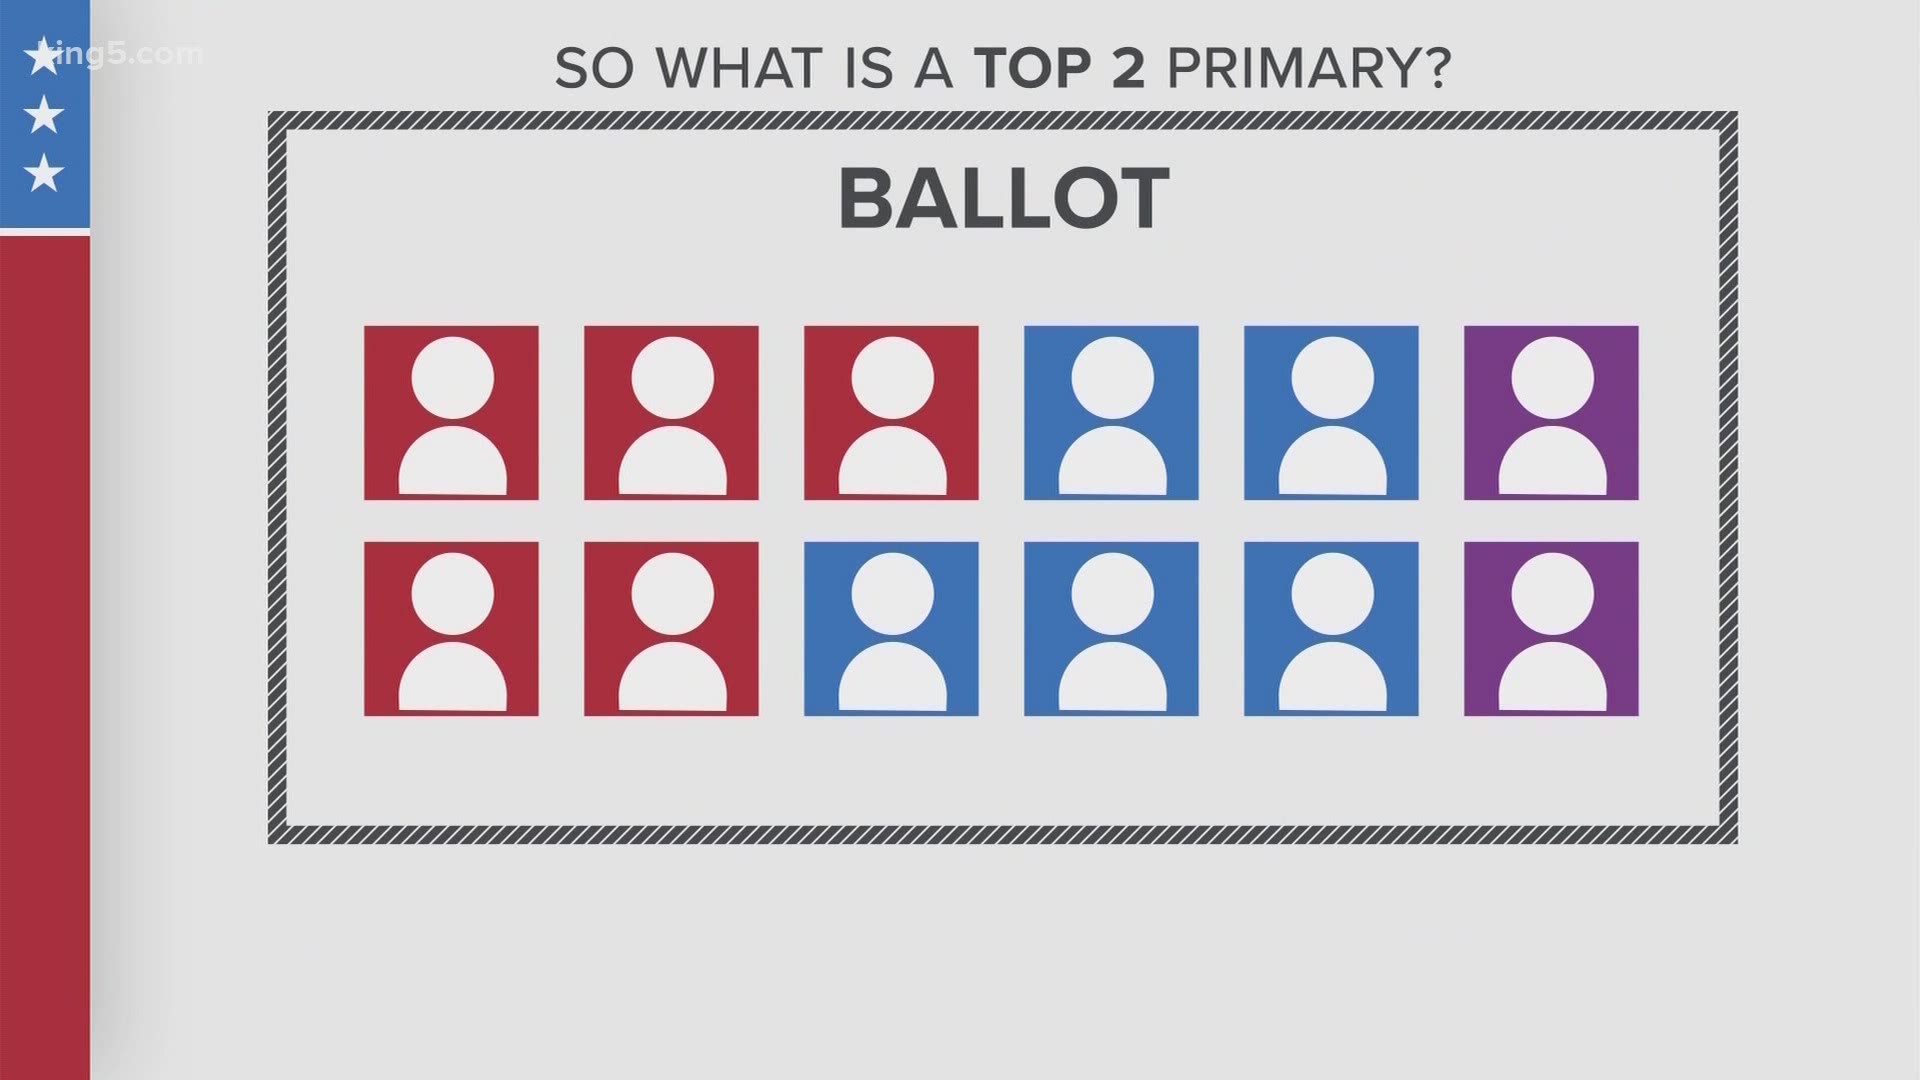 The two candidates, regardless of party, who collect the highest number of votes in the primary election advance to the general election.